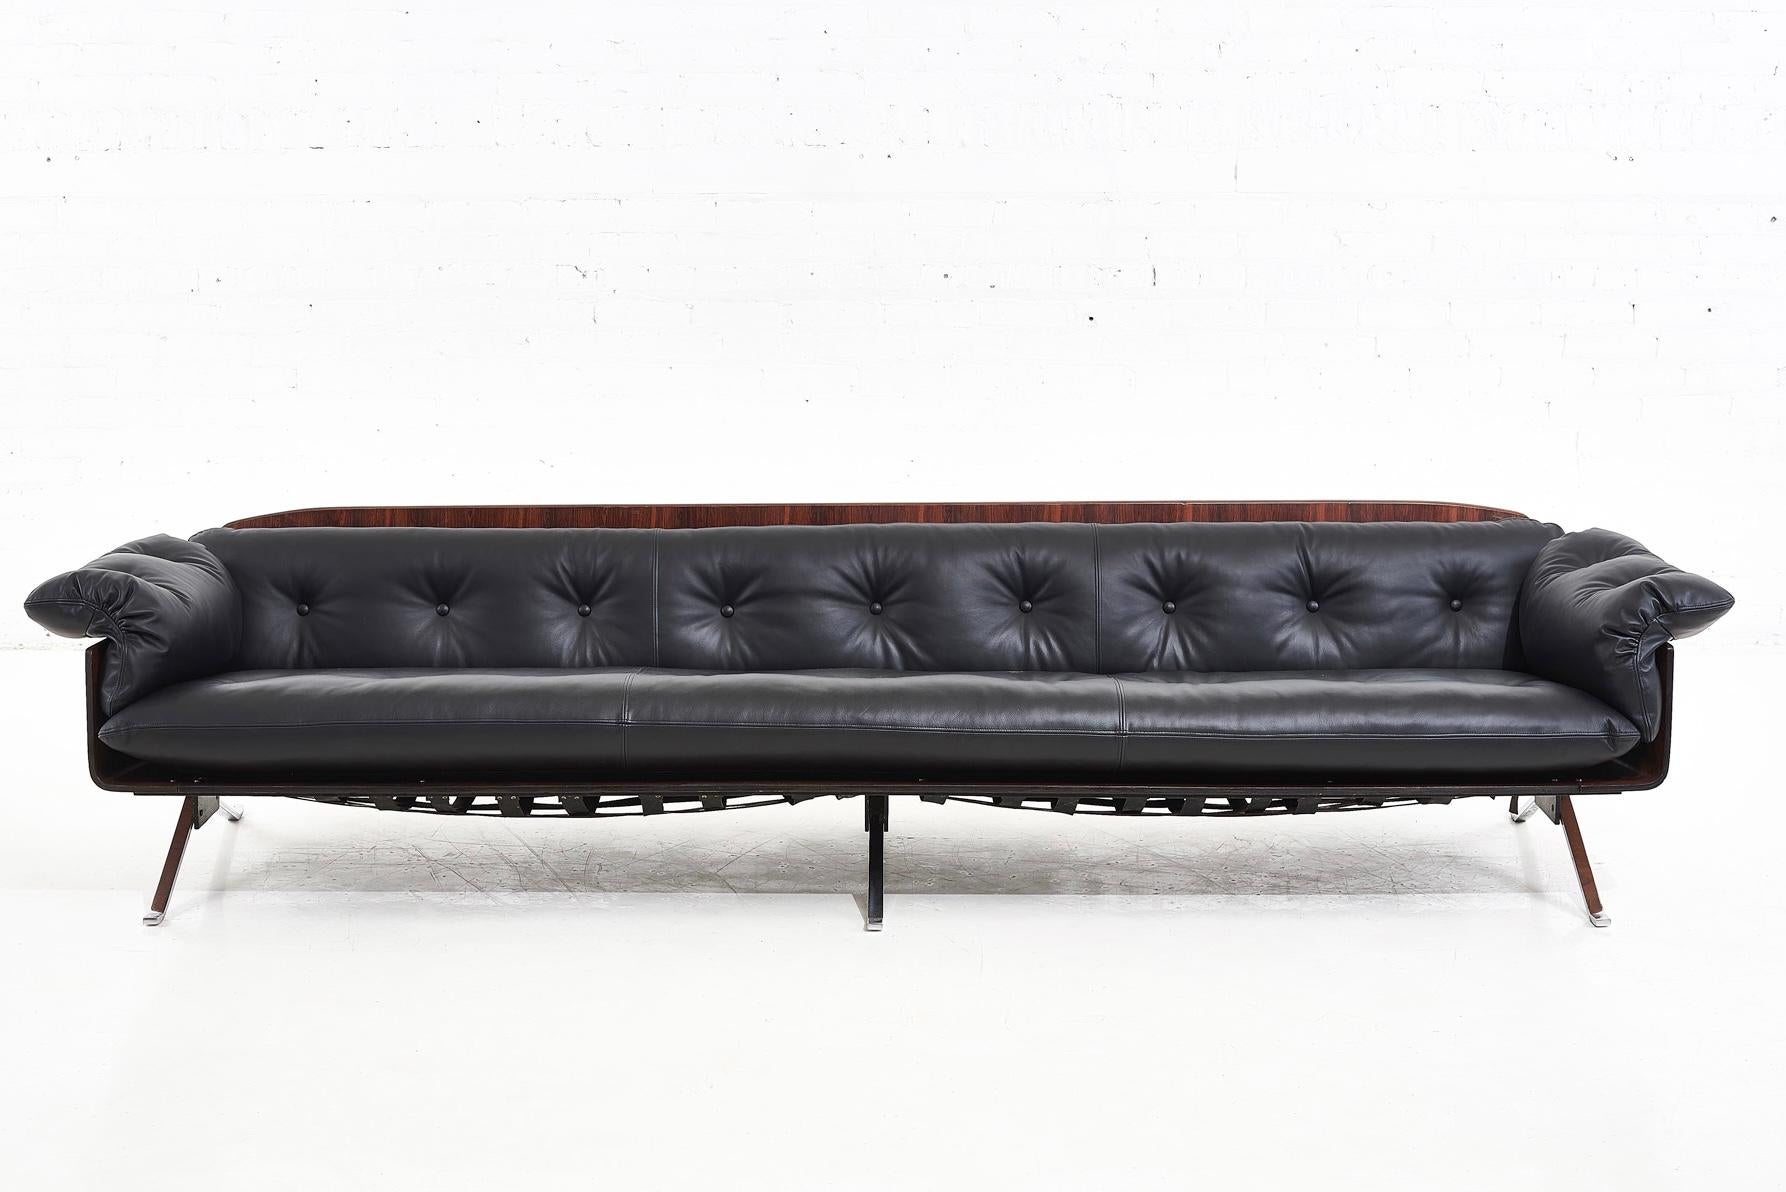 Brazilian Jacaranda Rosewood sofa by JD Moveis, 1960. Fully restored and reupholstered in black leather.